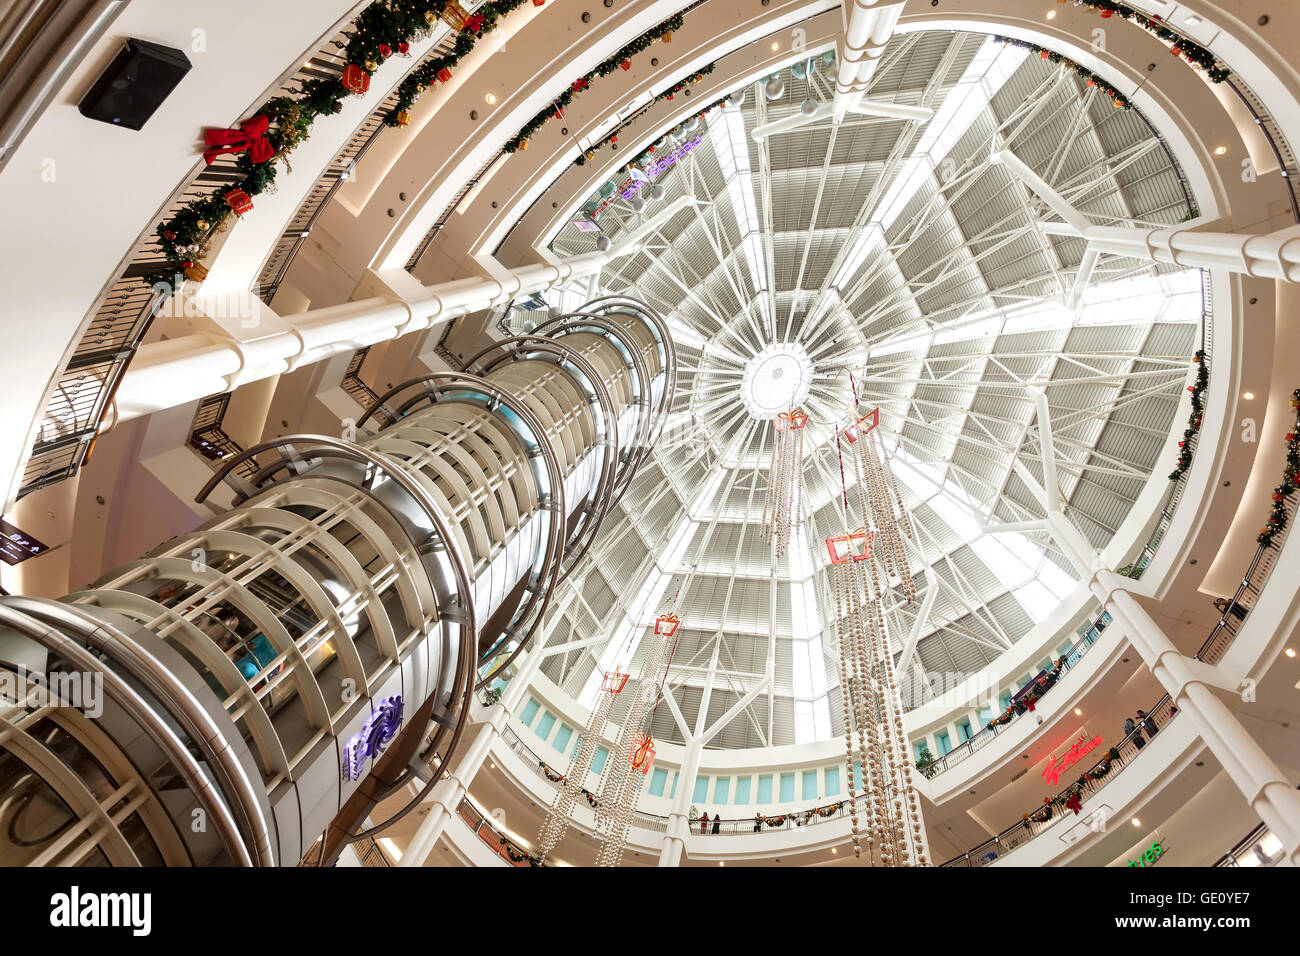 Christmas time in Suria KLCC, Malaysia's premier shopping mall with 6 levels of retail outlets and more than 320 stores. Stock Photo